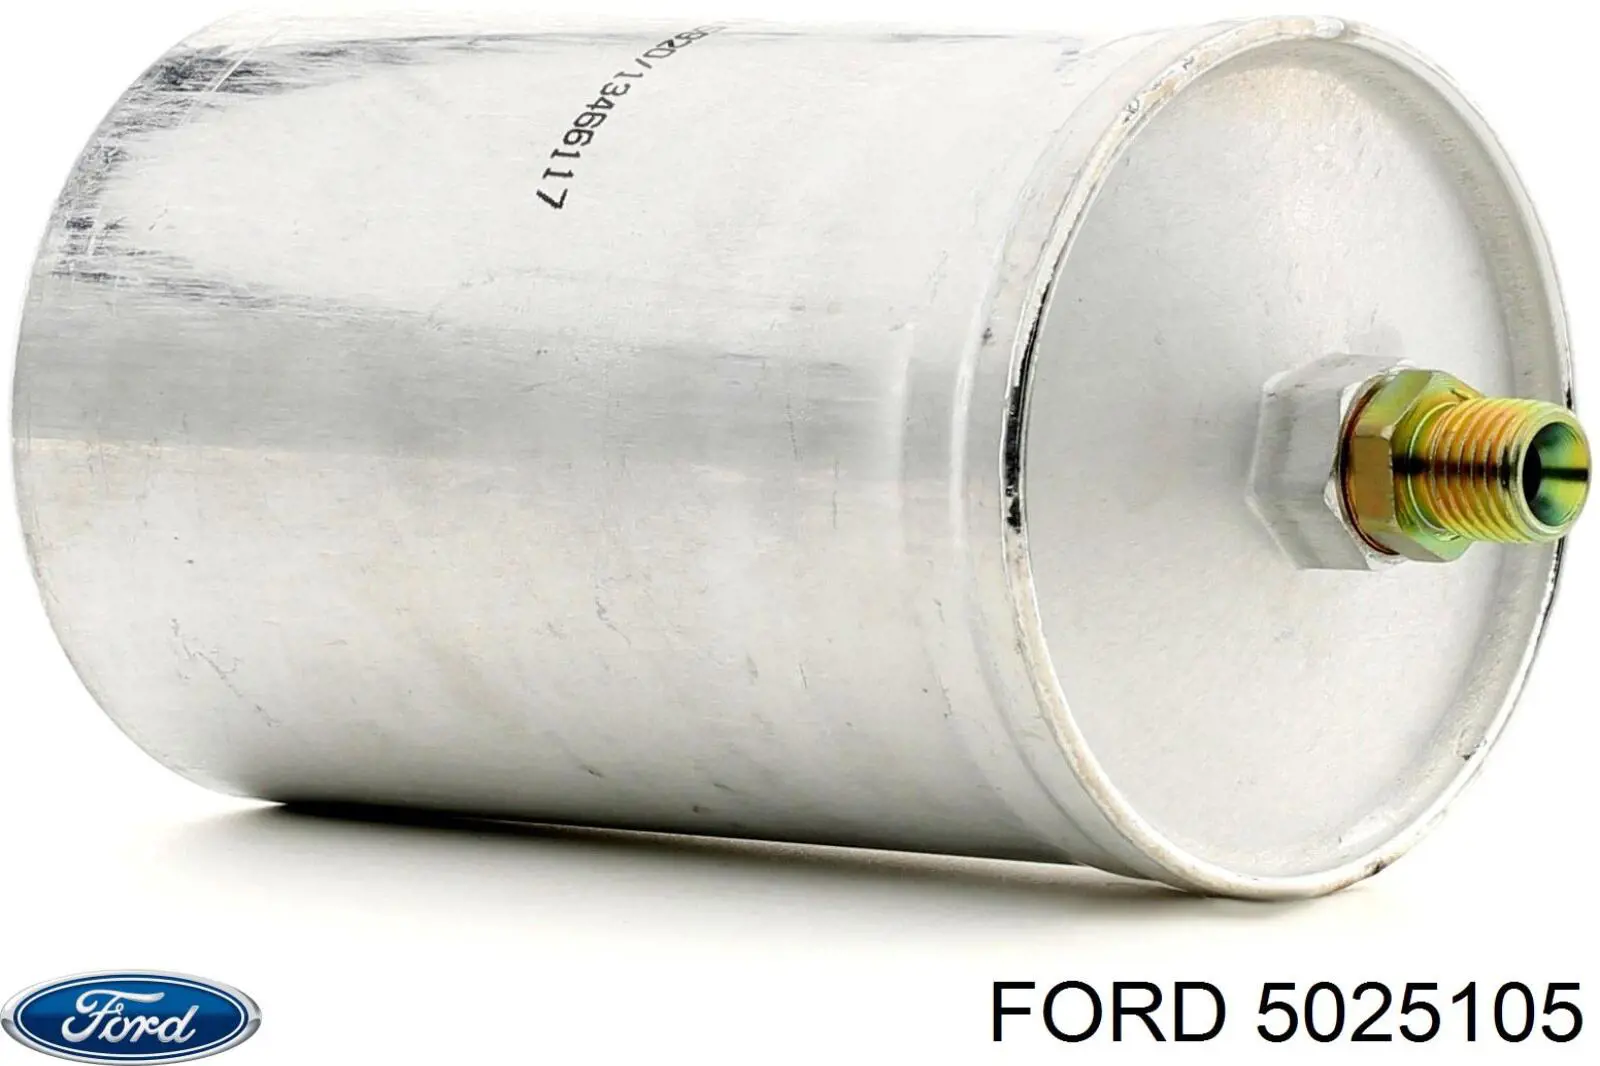 5025105 Ford filtro combustible